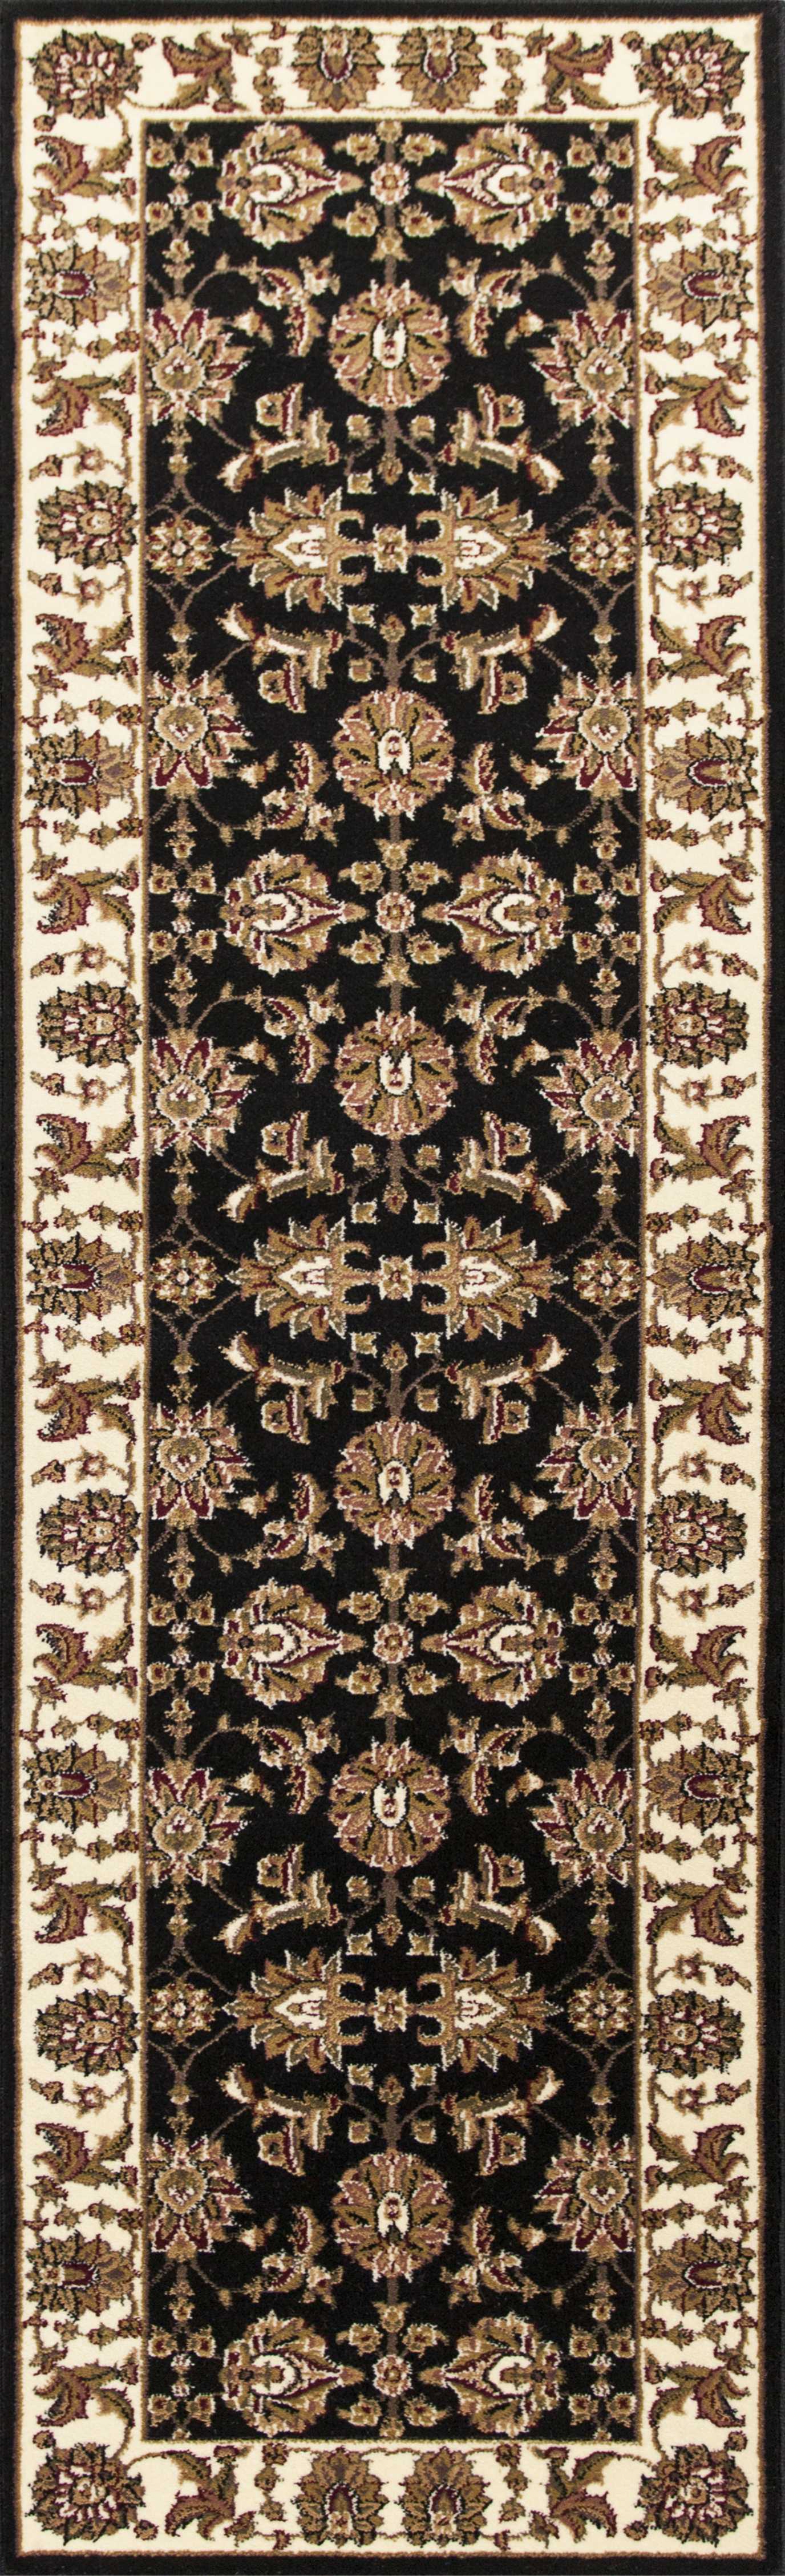 5' X 8' Black Or Ivory Floral Bordered Area Rug